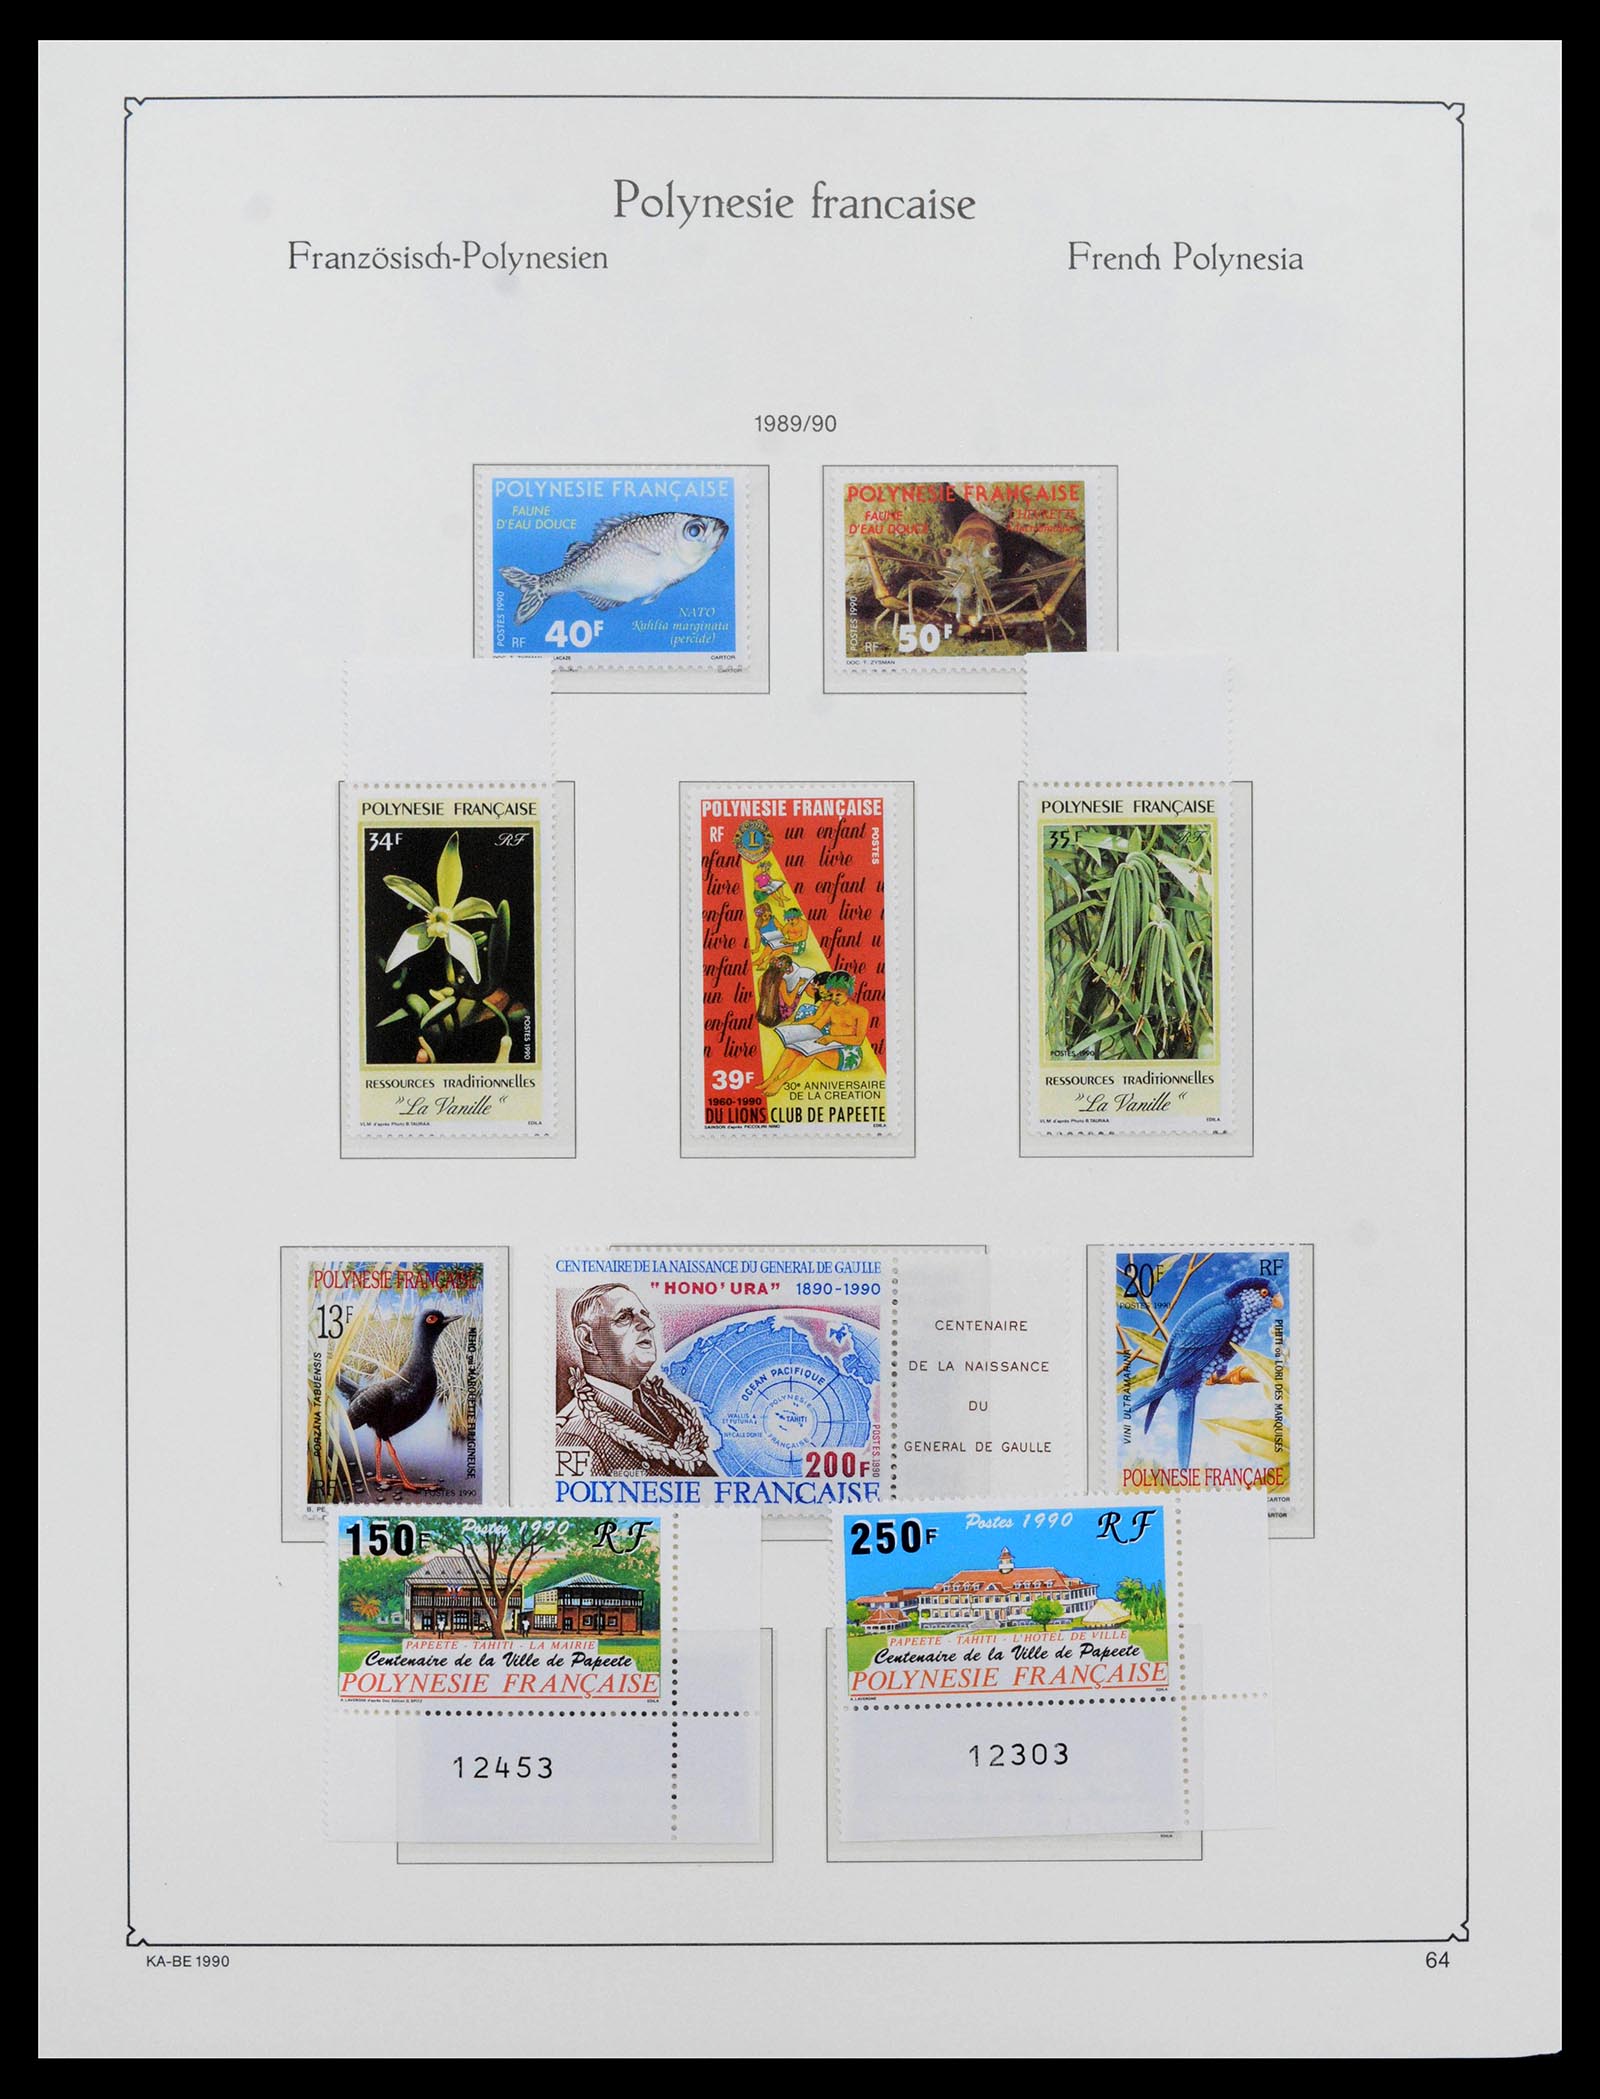 39153 0061 - Stamp collection 39153 Polynesia 1958-1990.